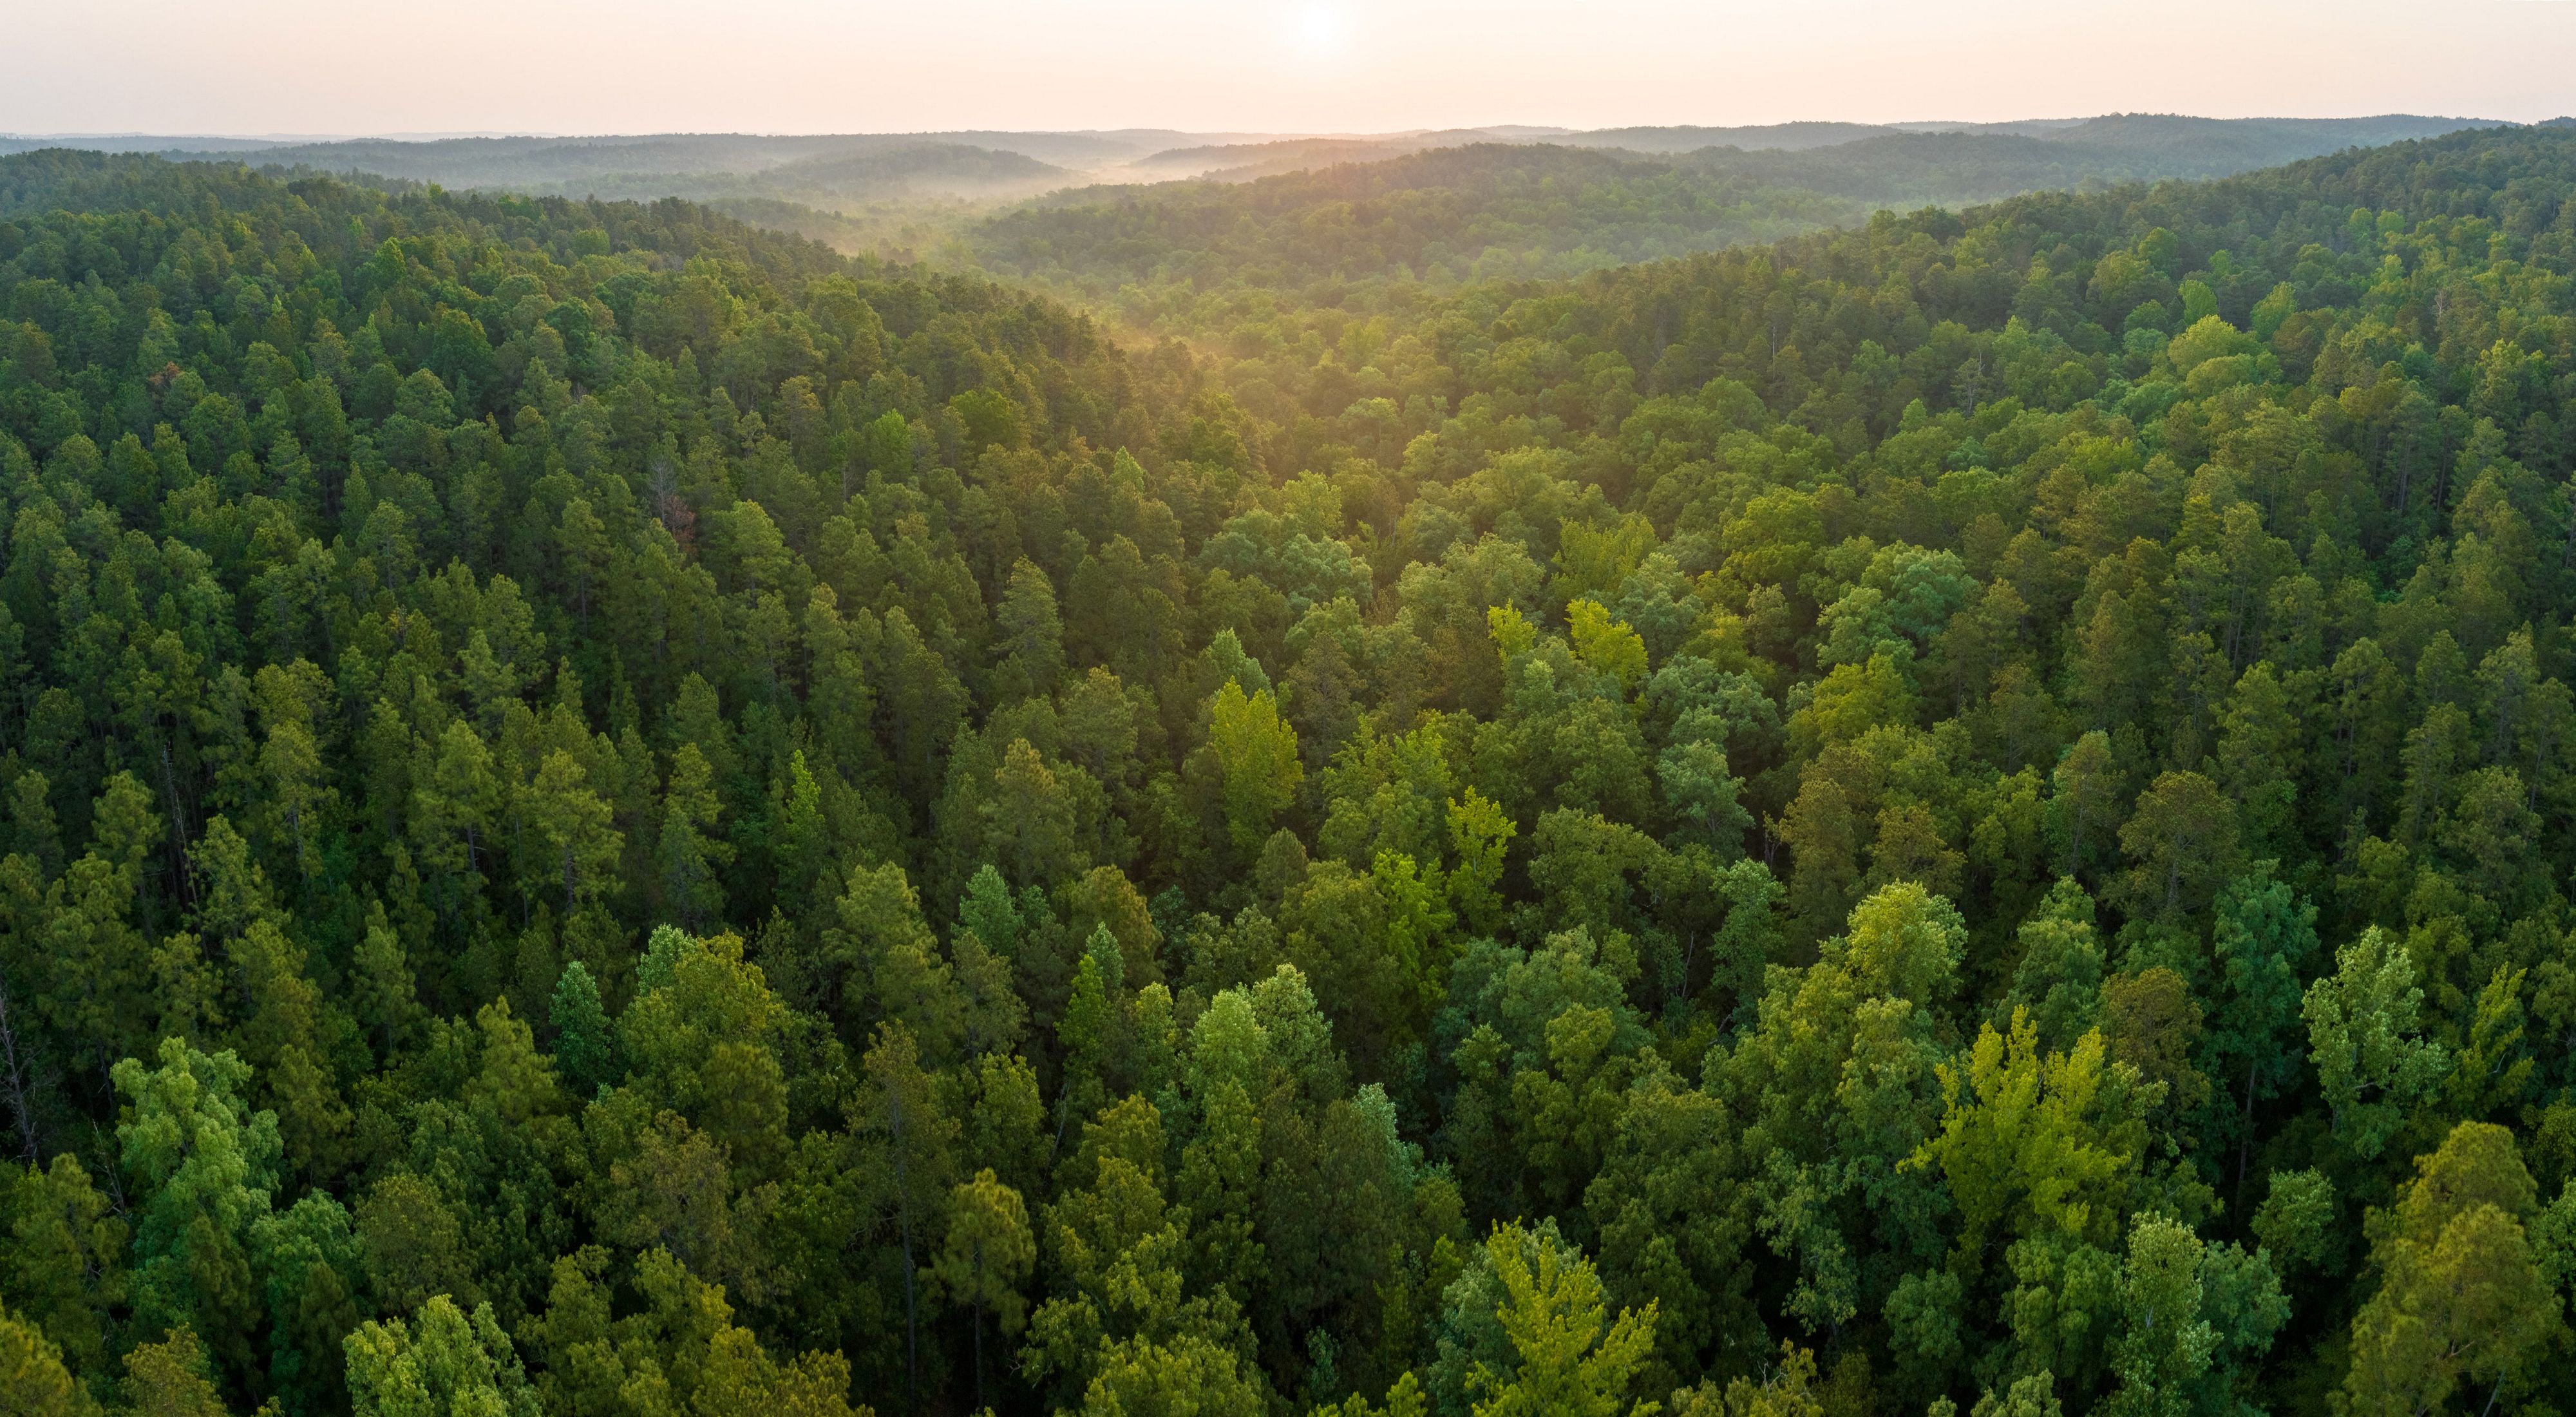 Aerial view of longleaf pine forest in Wheeler Mountain, Alabama.